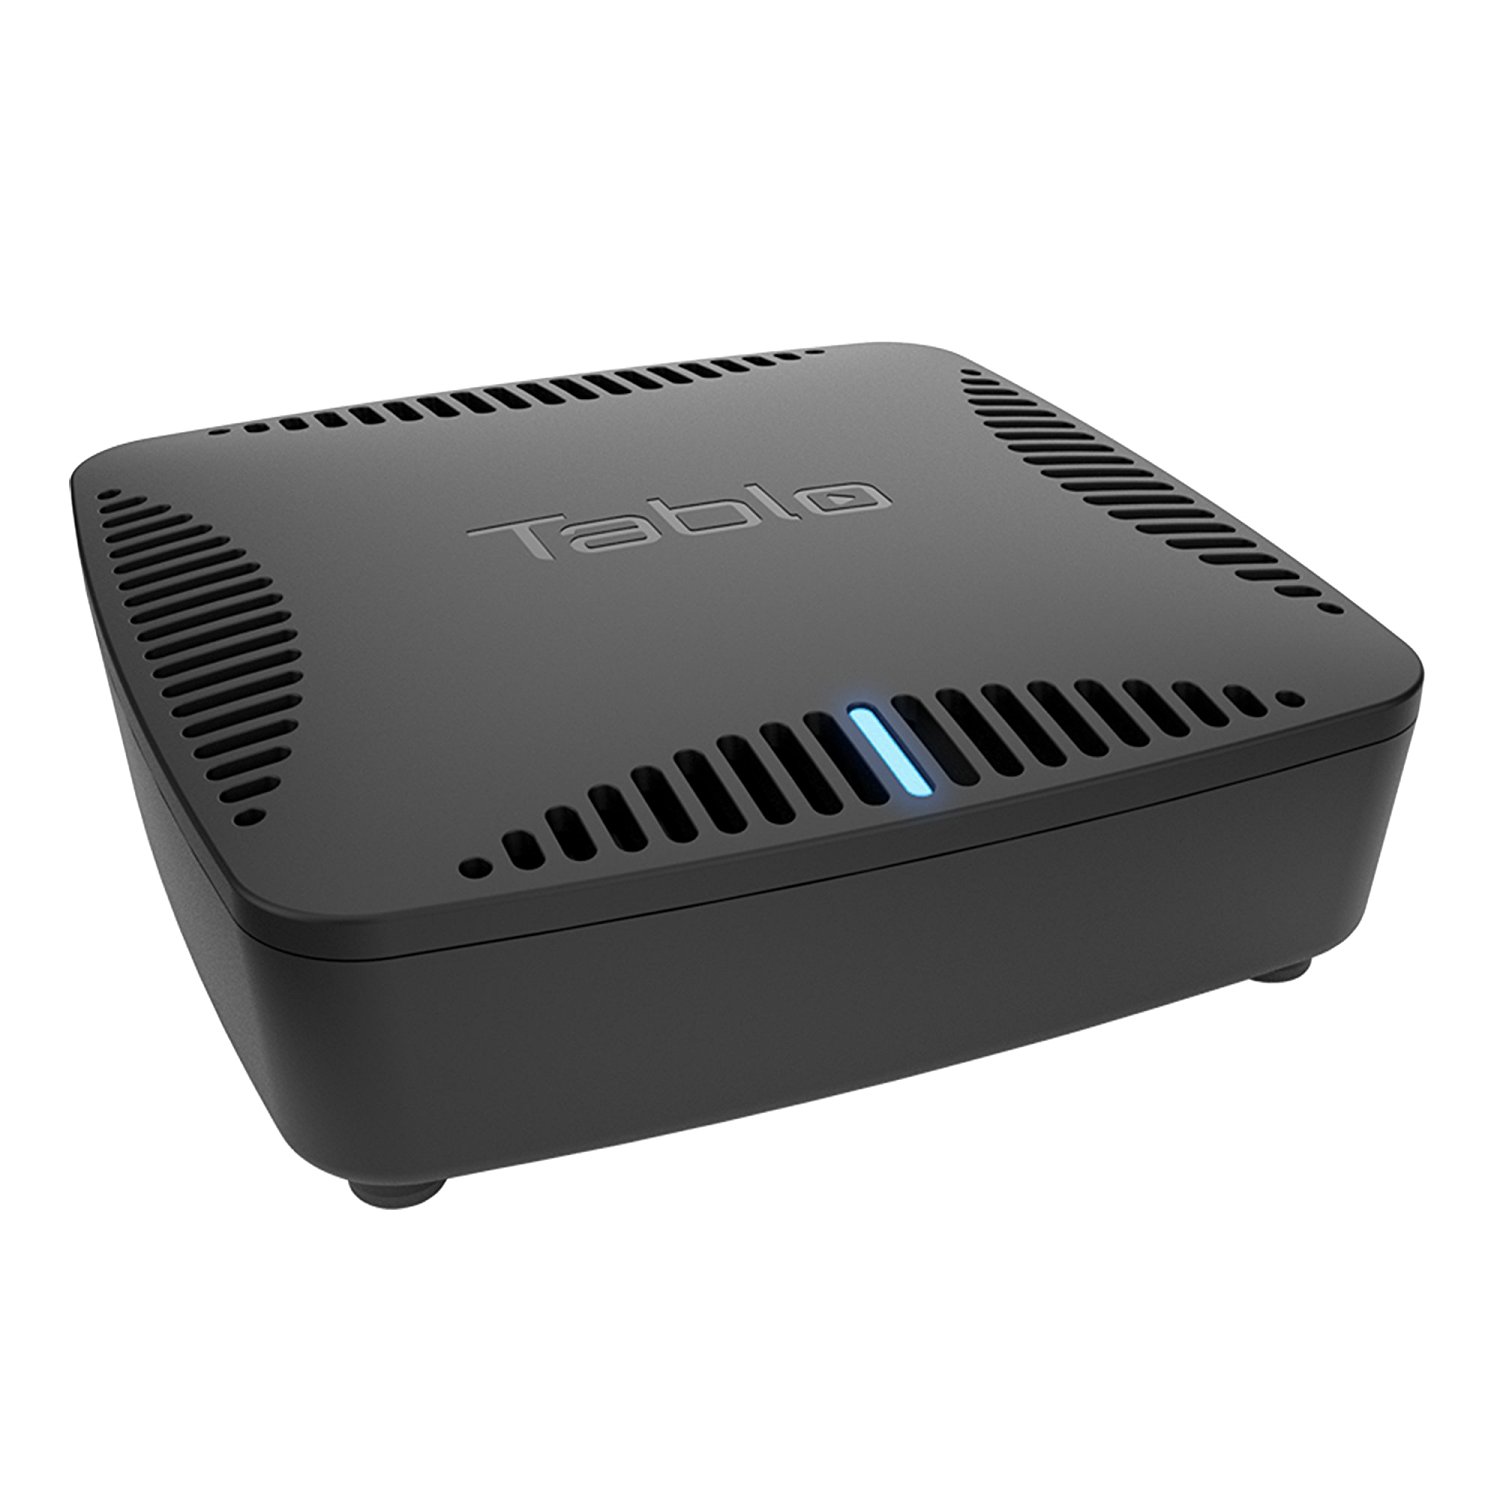 EXPIRED: The Tablo Dual Lite DVR is On Sale For Just $109.99 as An Early Black Friday Sale